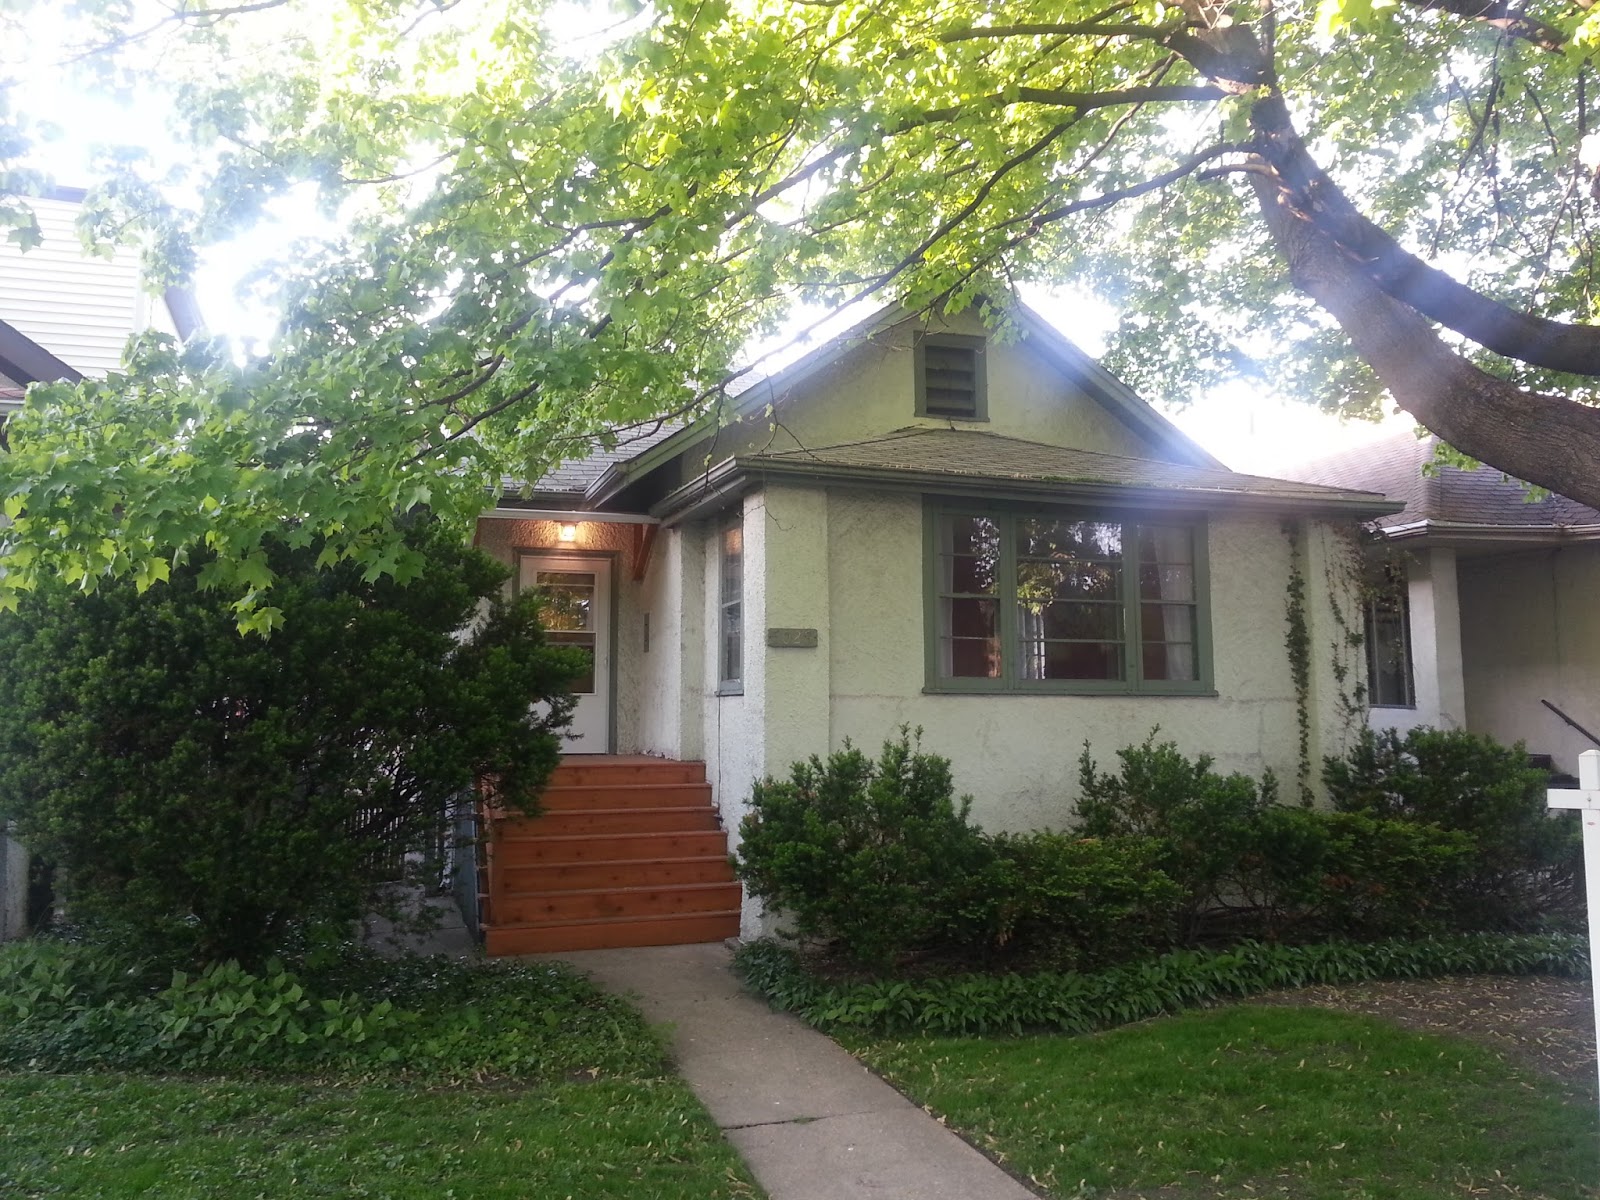 The Chicago Real Estate Local: Under contract! Jefferson Park buyers jump at